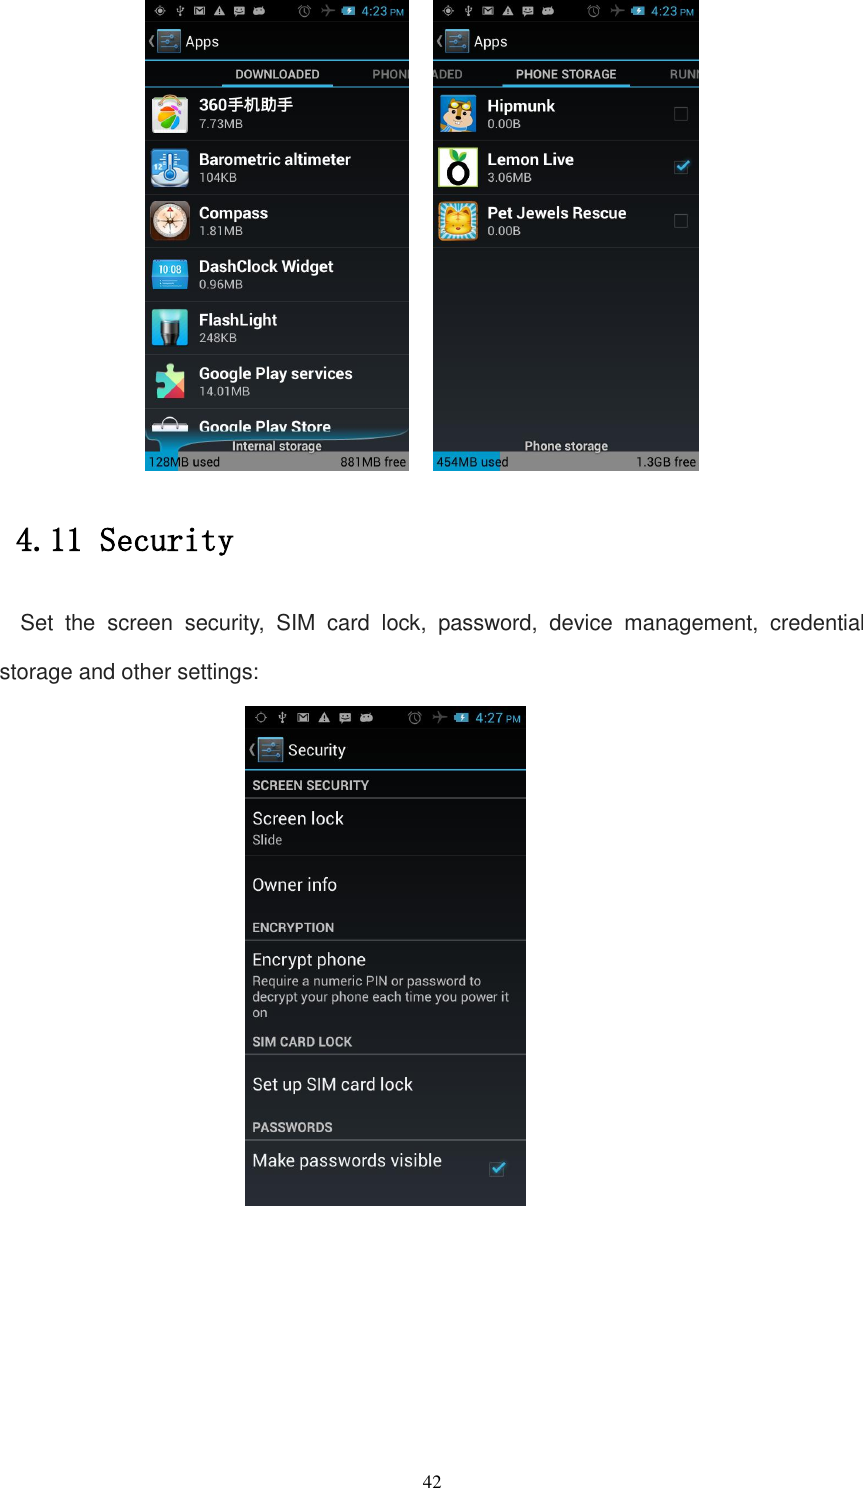   42     4.11 Security Set  the  screen  security,  SIM  card  lock,  password,  device  management,  credential storage and other settings:  